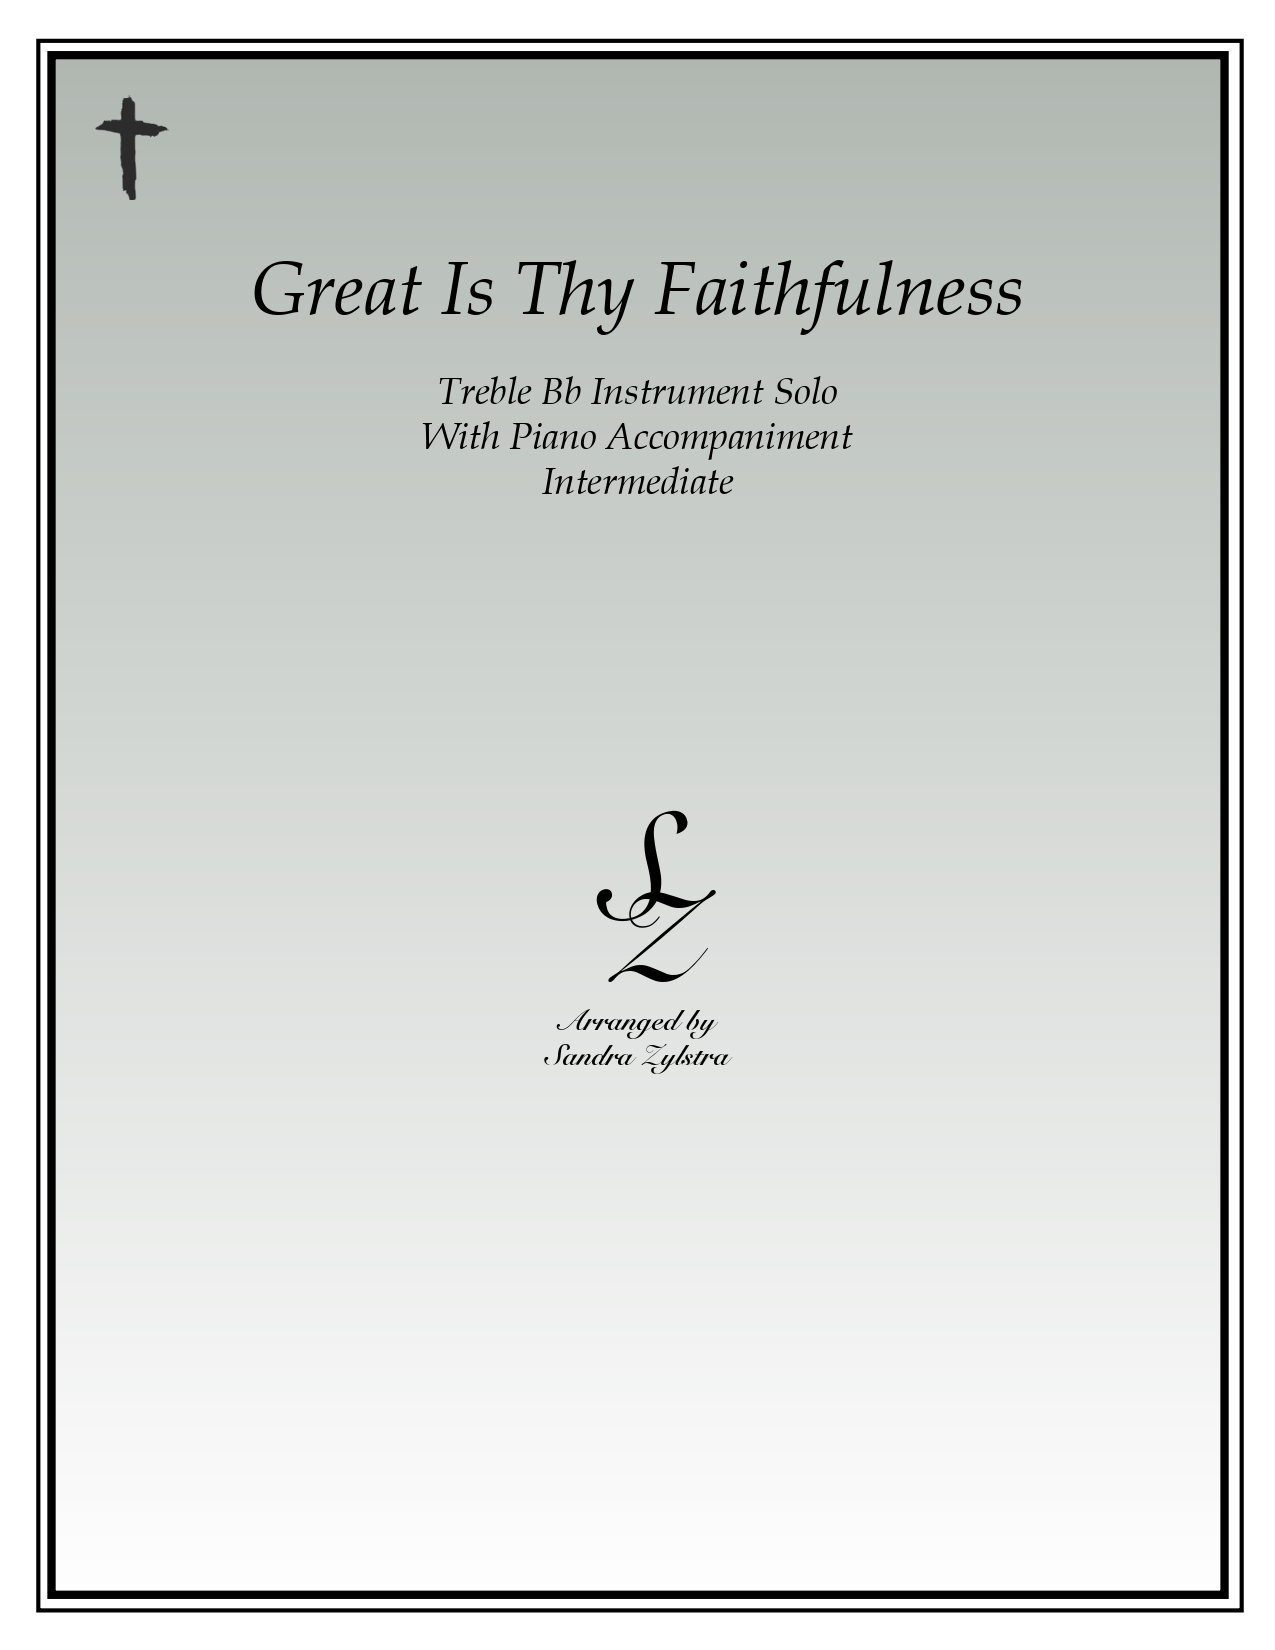 Great Is Thy Faithfulness Bb instrument solo part cover page 00011